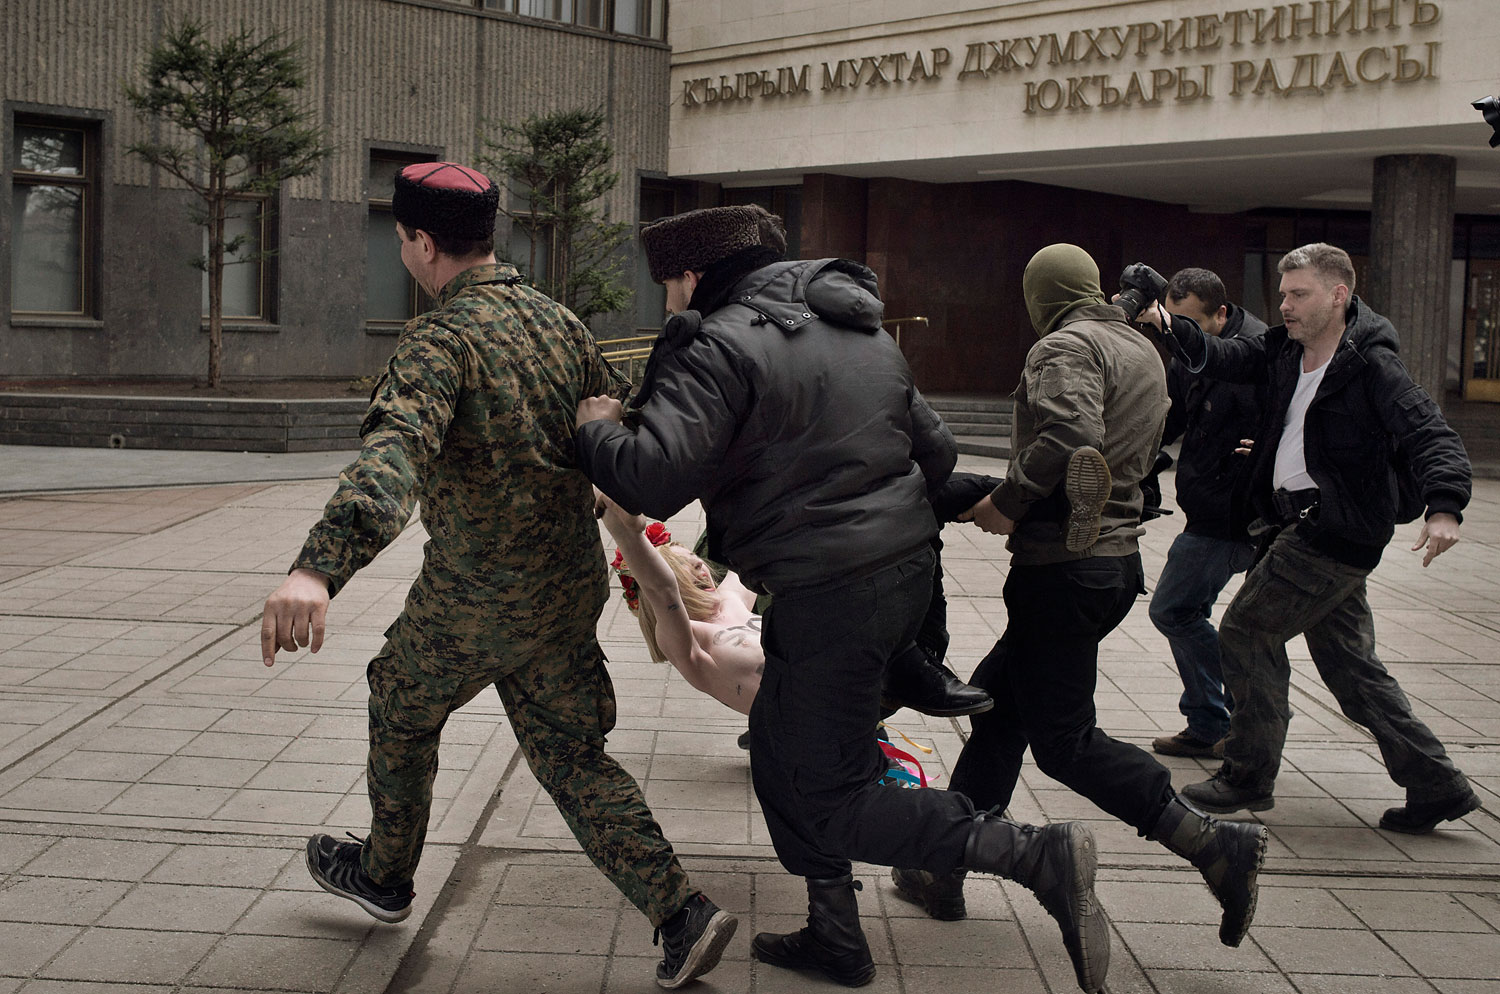 Cossacks and Ukrainian police detain feminist protesters who interrupted a pro-Russian rally with shouts of “Stop Putin’s war” in Simferopol, Crimea, March 6, 2014.